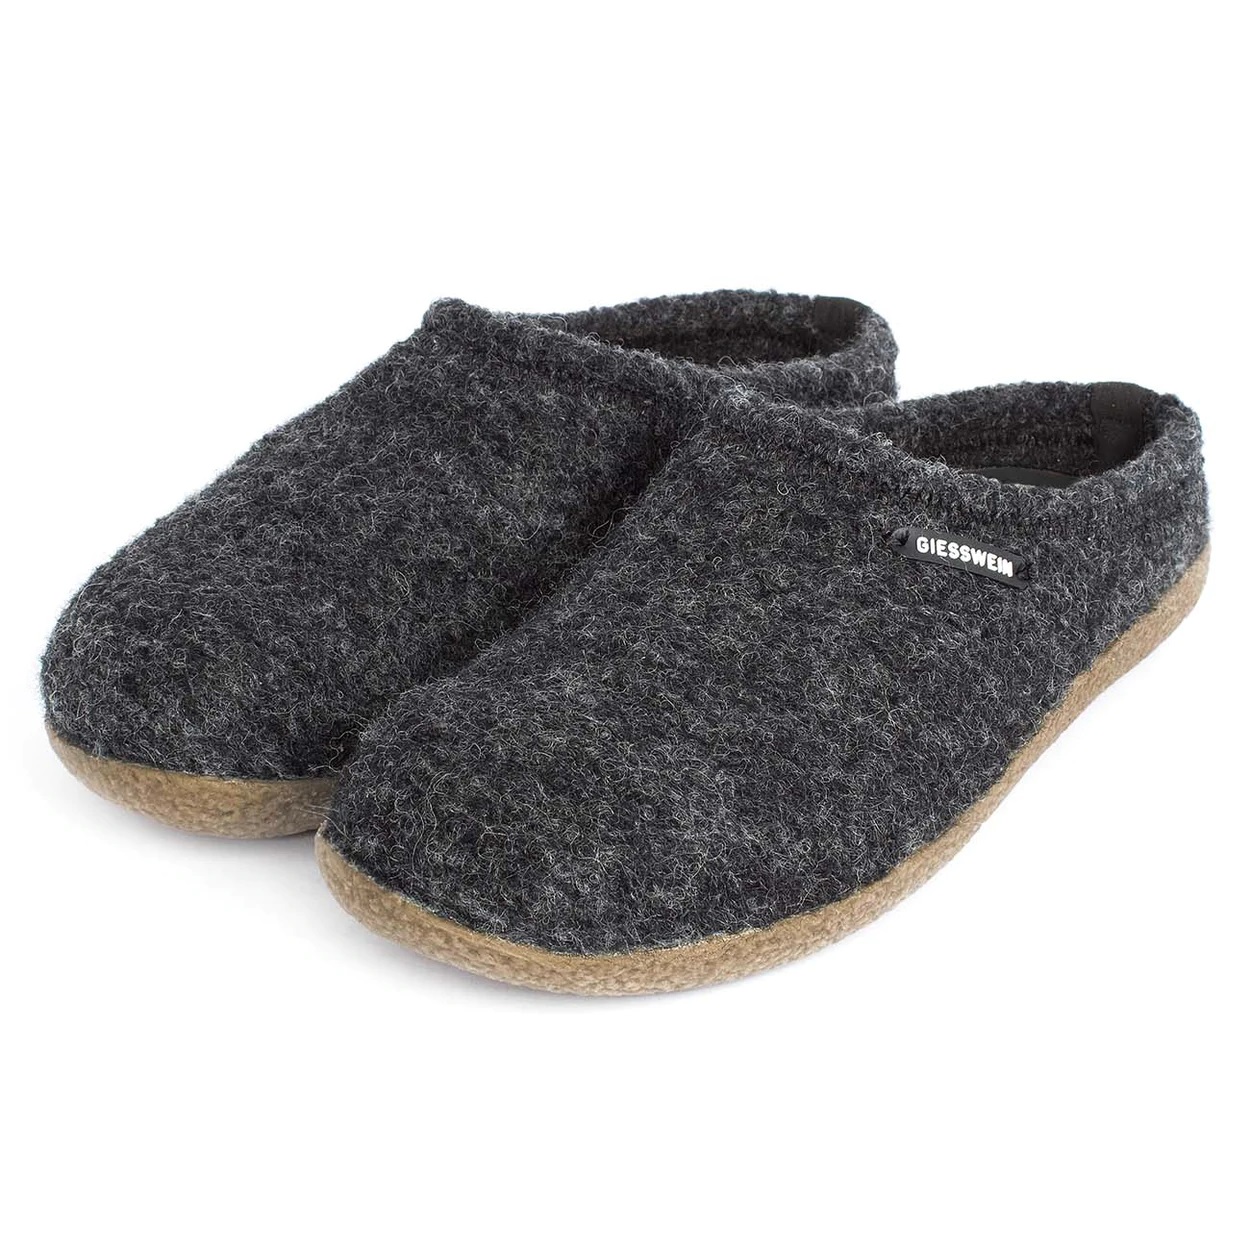 Giesswein Slippers Review - Must Read This Before Buying